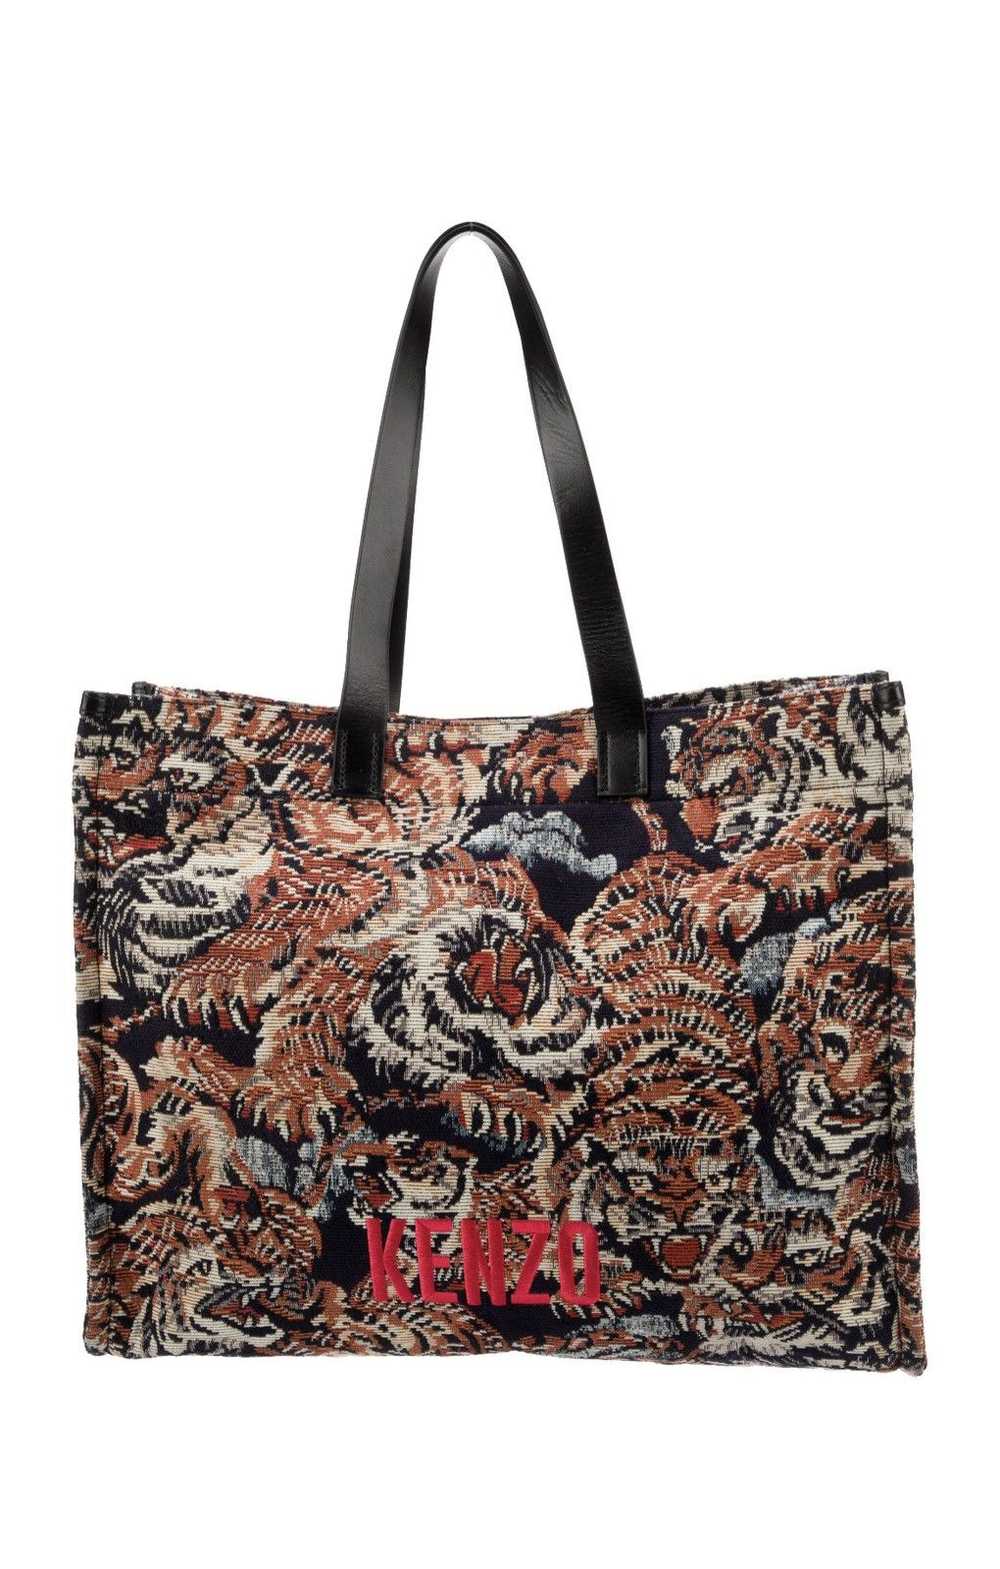 Kenzo KENZO Canvas Tapestry Tiger Tote - image 1